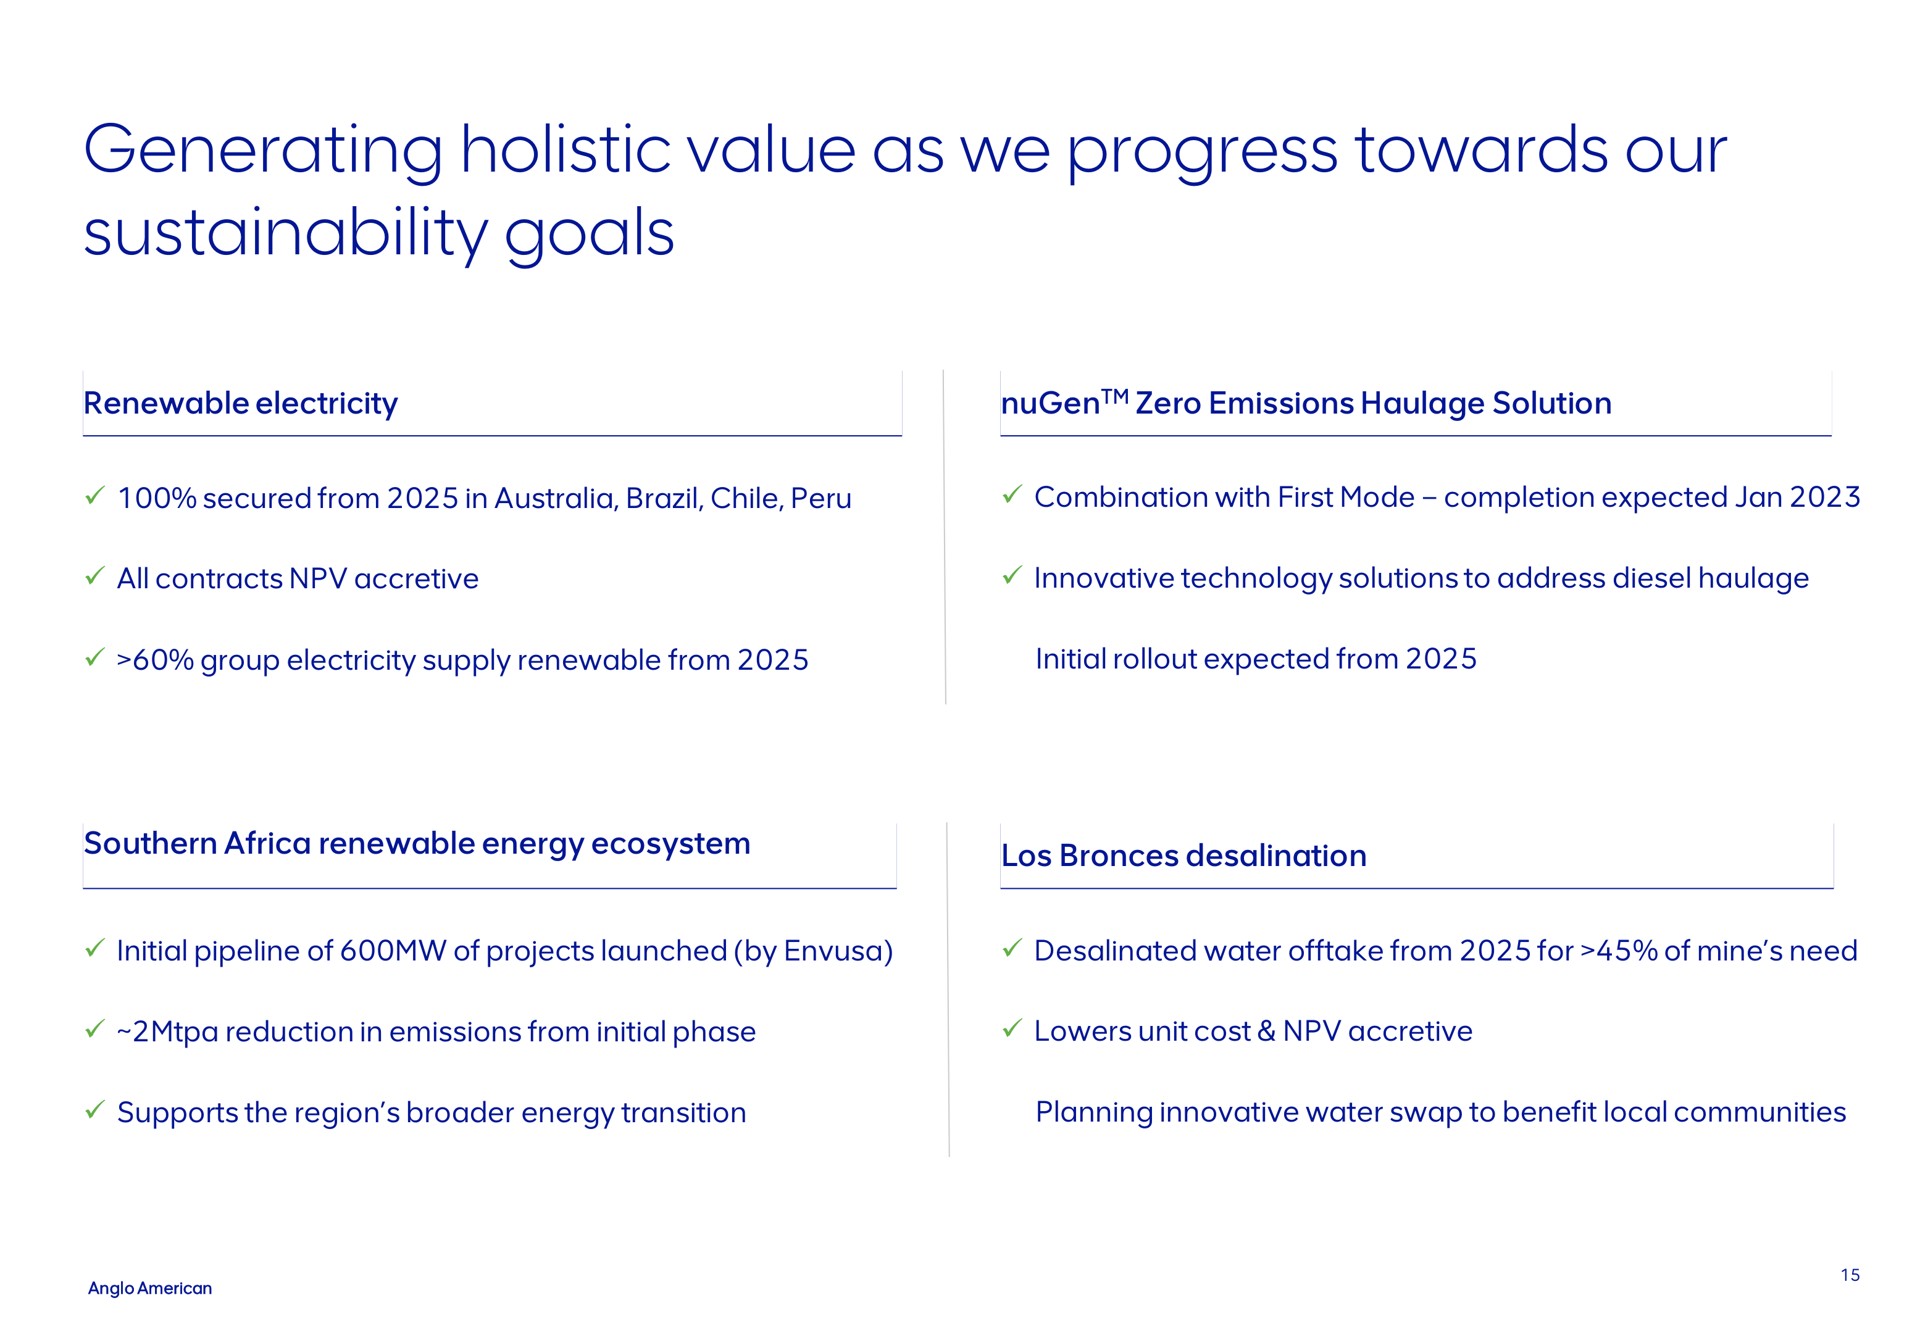 generating holistic value as we progress towards our goals | AngloAmerican